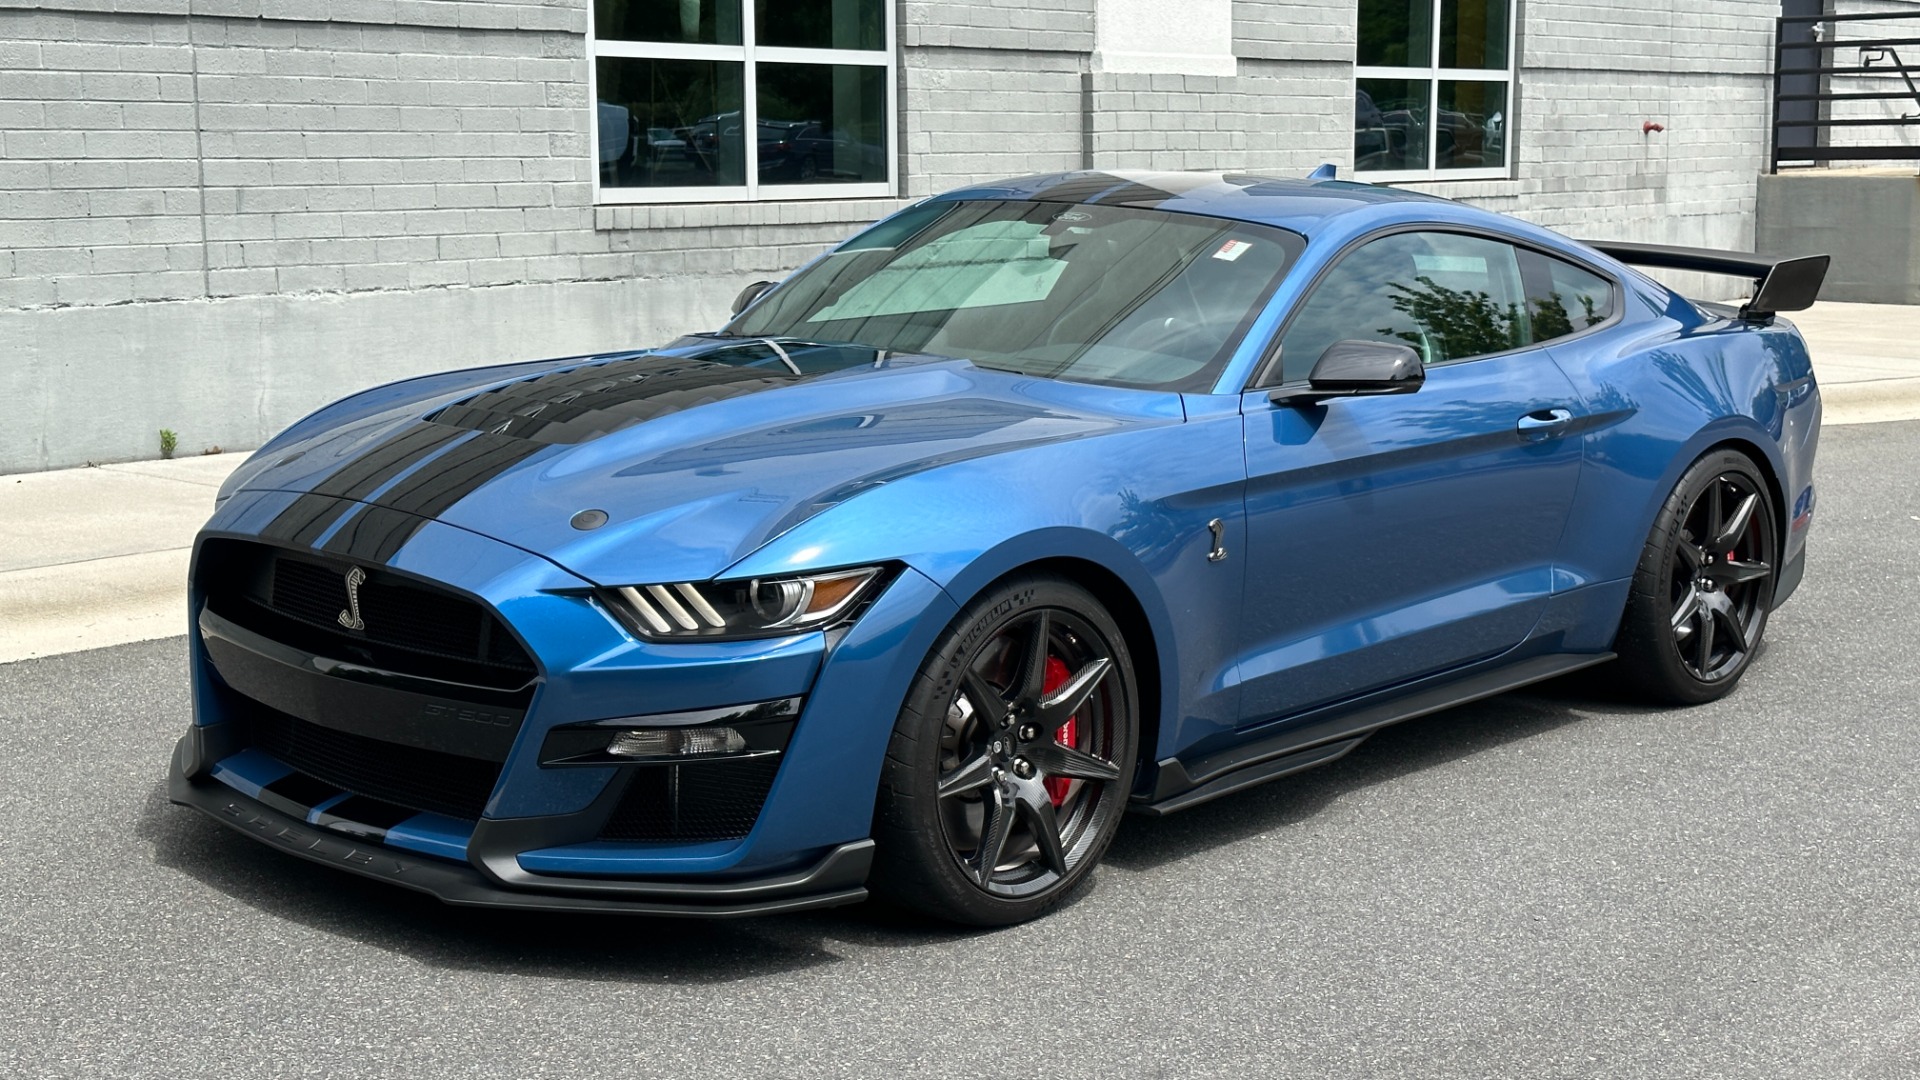 Used 2021 Ford Mustang SHELBY GT500 / CARBON FIBER TRACK PACK / RECARO / TECH PKG / PAINTED STRIPE for sale $118,000 at Formula Imports in Charlotte NC 28227 7